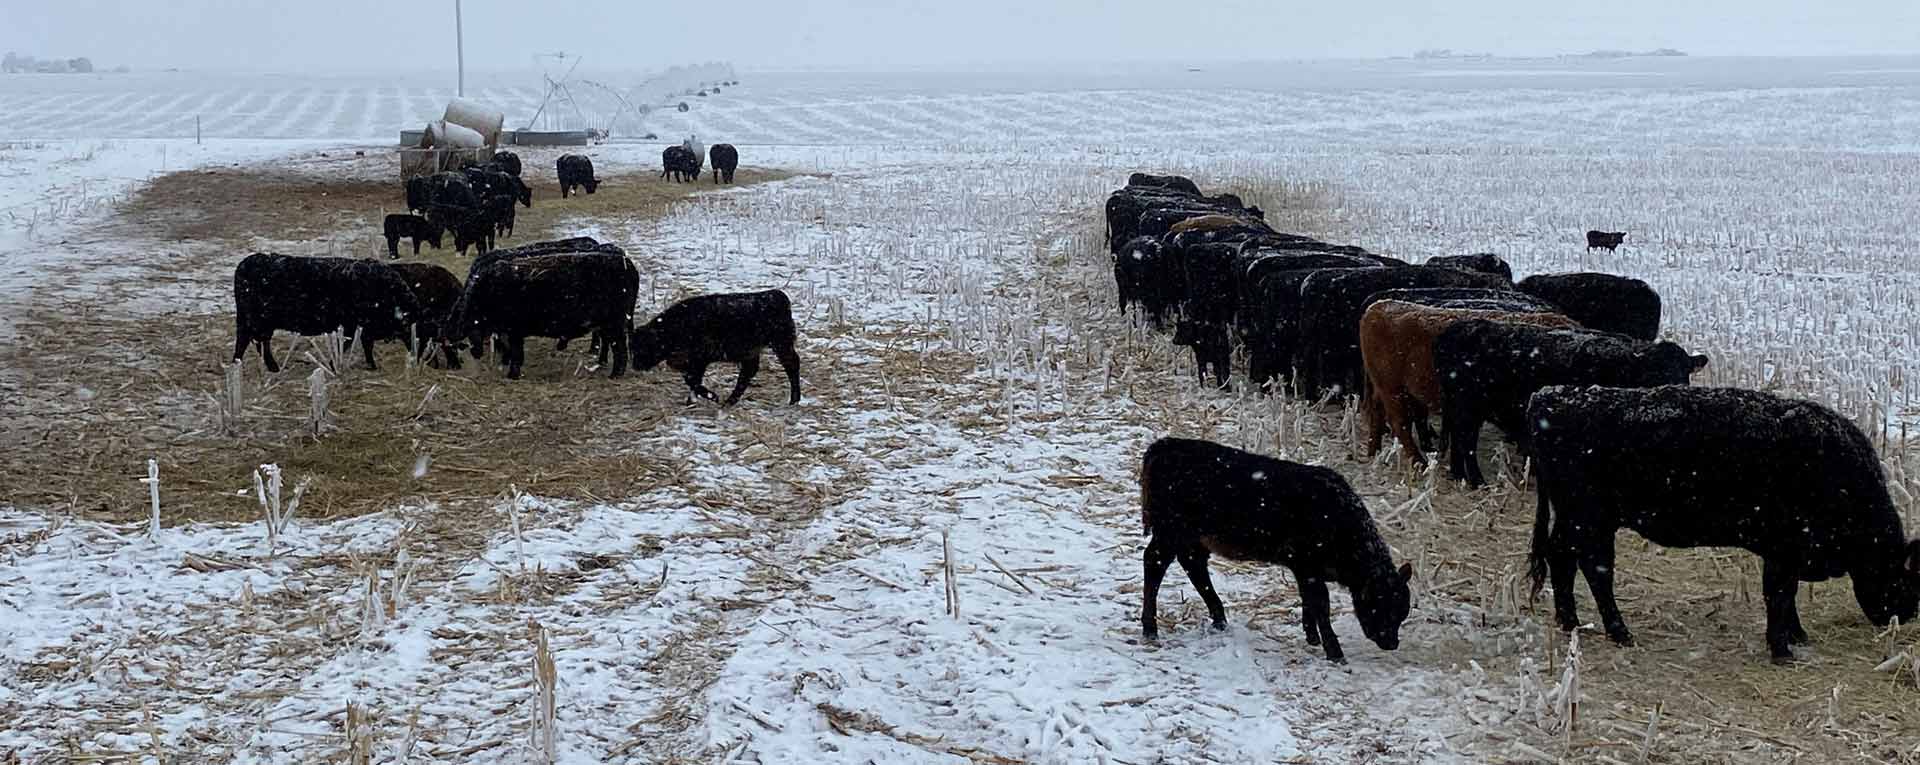 cows grazing during the winter